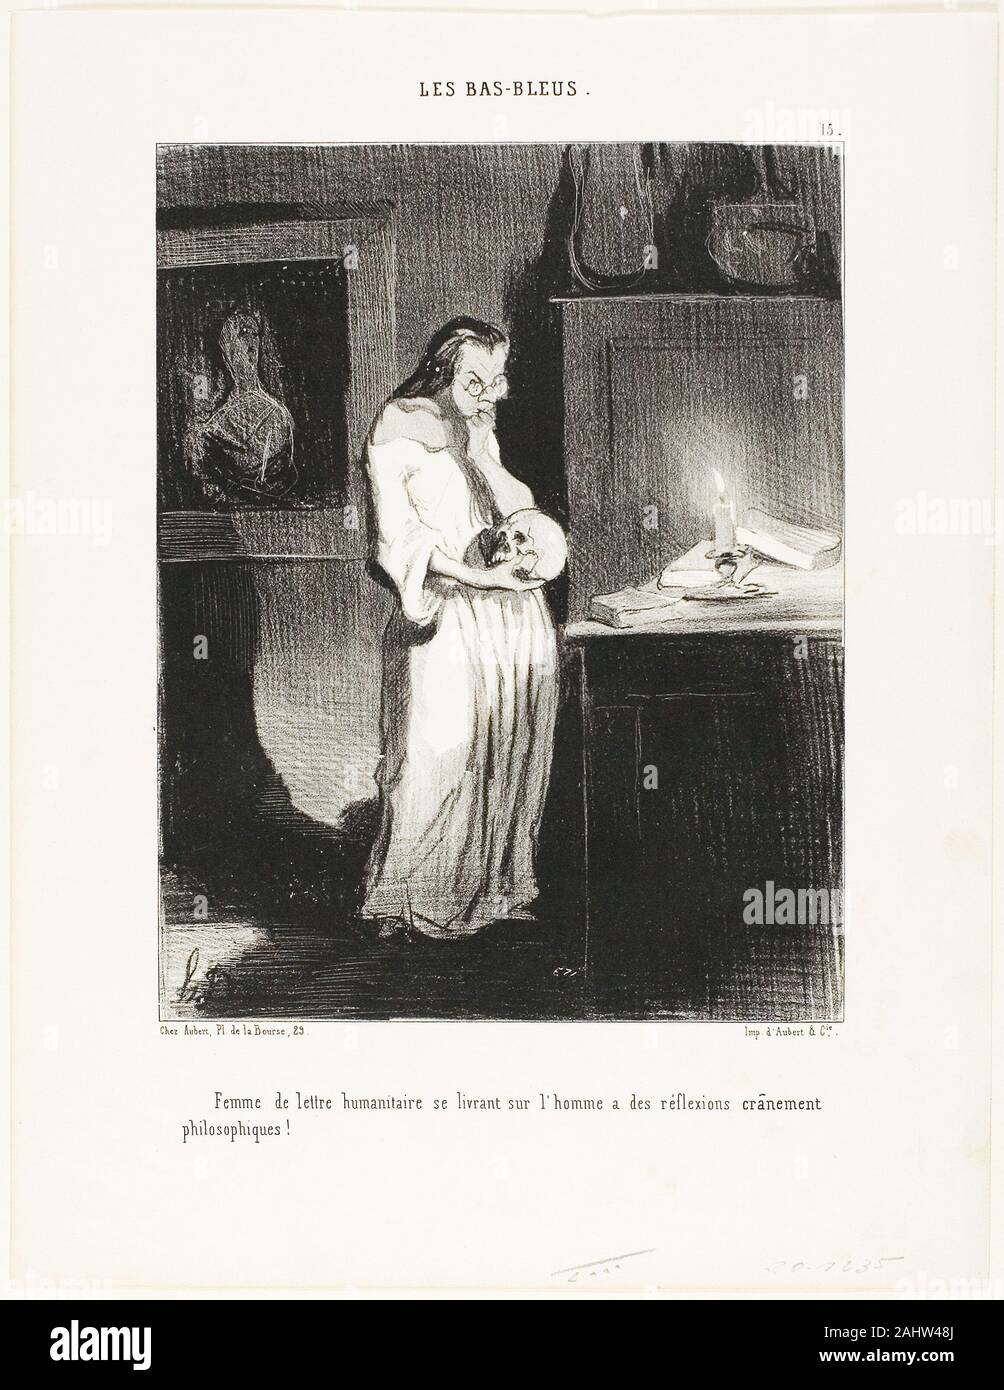 Honoré-Victorin Daumier. A humanist woman of letters abandoning herself to the cerebral philosophic reflections on the subject of man!, plate 15 from Les Bas-Bleus. 1844. France. Lithograph in black on white wove paper Stock Photo